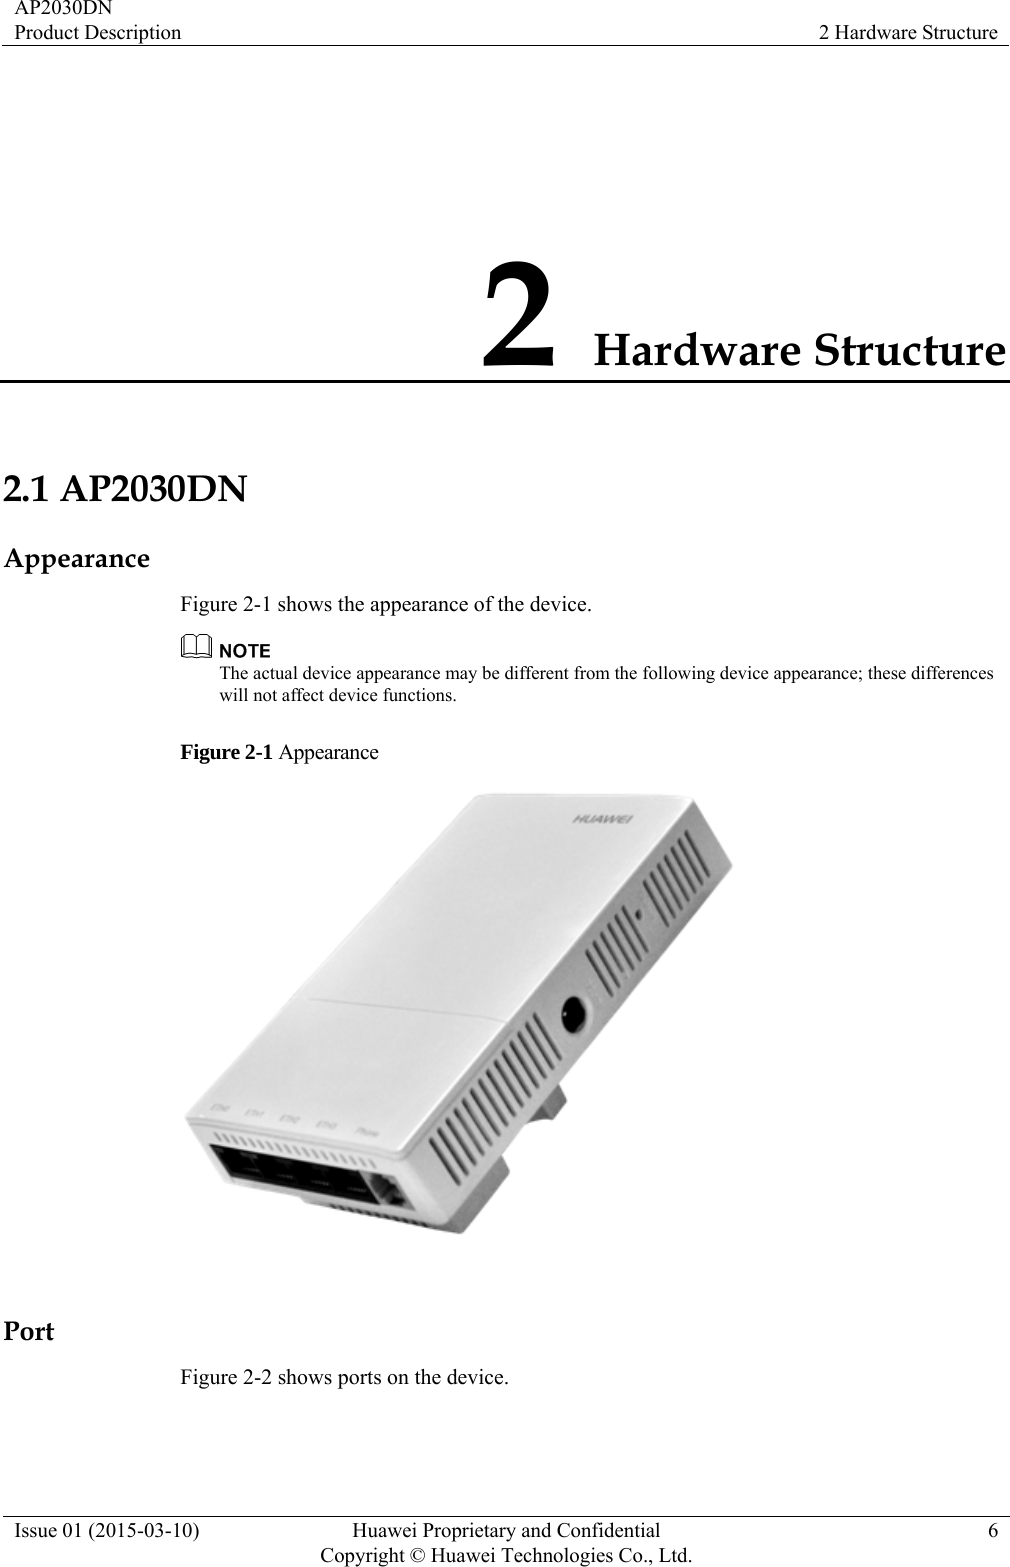 AP2030DN Product Description  2 Hardware Structure Issue 01 (2015-03-10)  Huawei Proprietary and Confidential         Copyright © Huawei Technologies Co., Ltd.6 2 Hardware Structure 2.1 AP2030DN Appearance Figure 2-1 shows the appearance of the device.  The actual device appearance may be different from the following device appearance; these differences will not affect device functions. Figure 2-1 Appearance   Port Figure 2-2 shows ports on the device. 